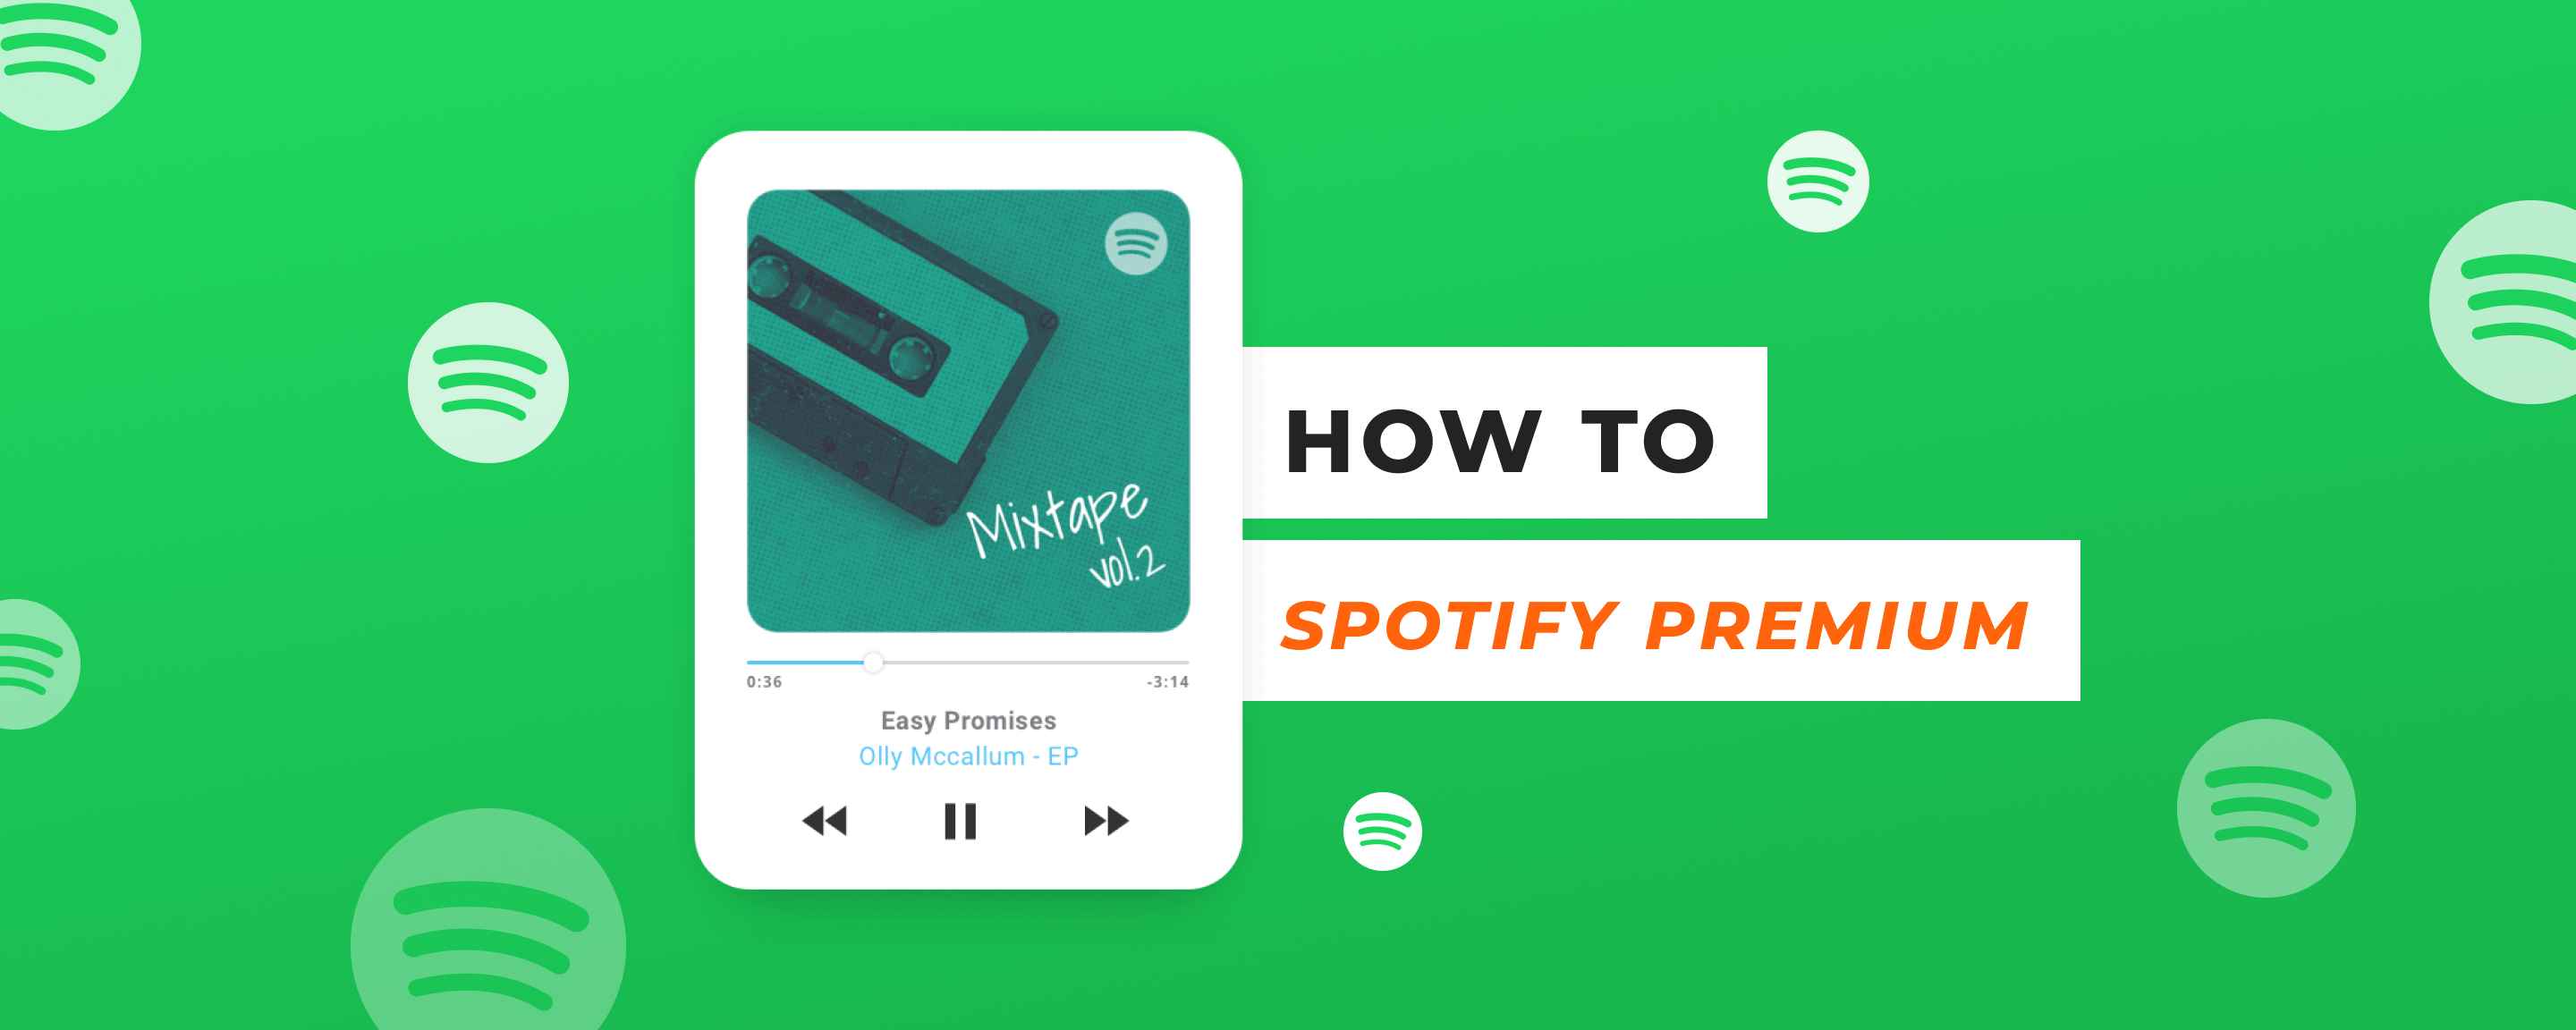 Get Premium On Spotify For Free